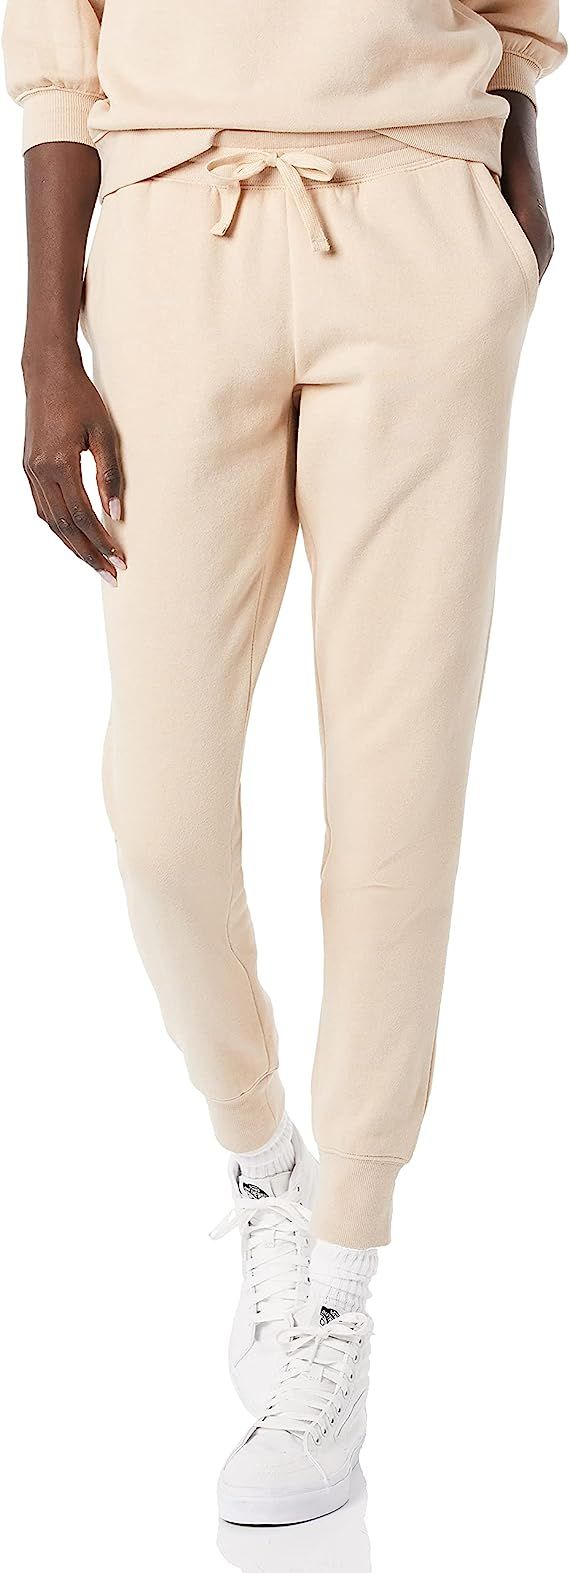 Amazon Essentials Women's Relaxed Fit Fleece Jogger Sweatpant (Available in Plus Size) | Amazon (US)